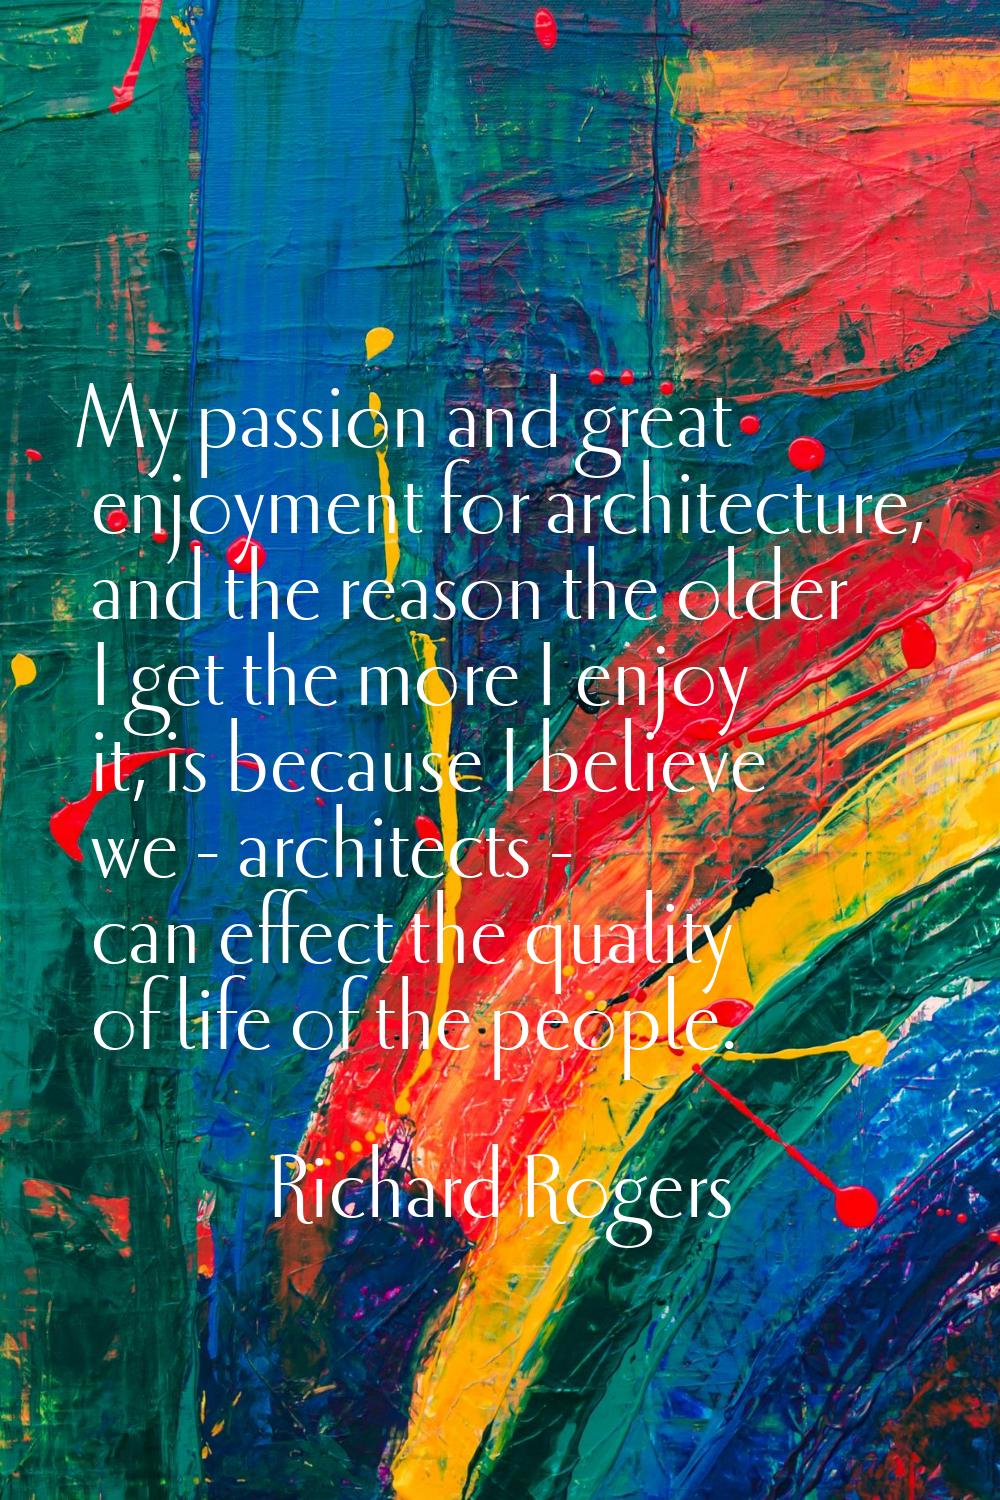 My passion and great enjoyment for architecture, and the reason the older I get the more I enjoy it